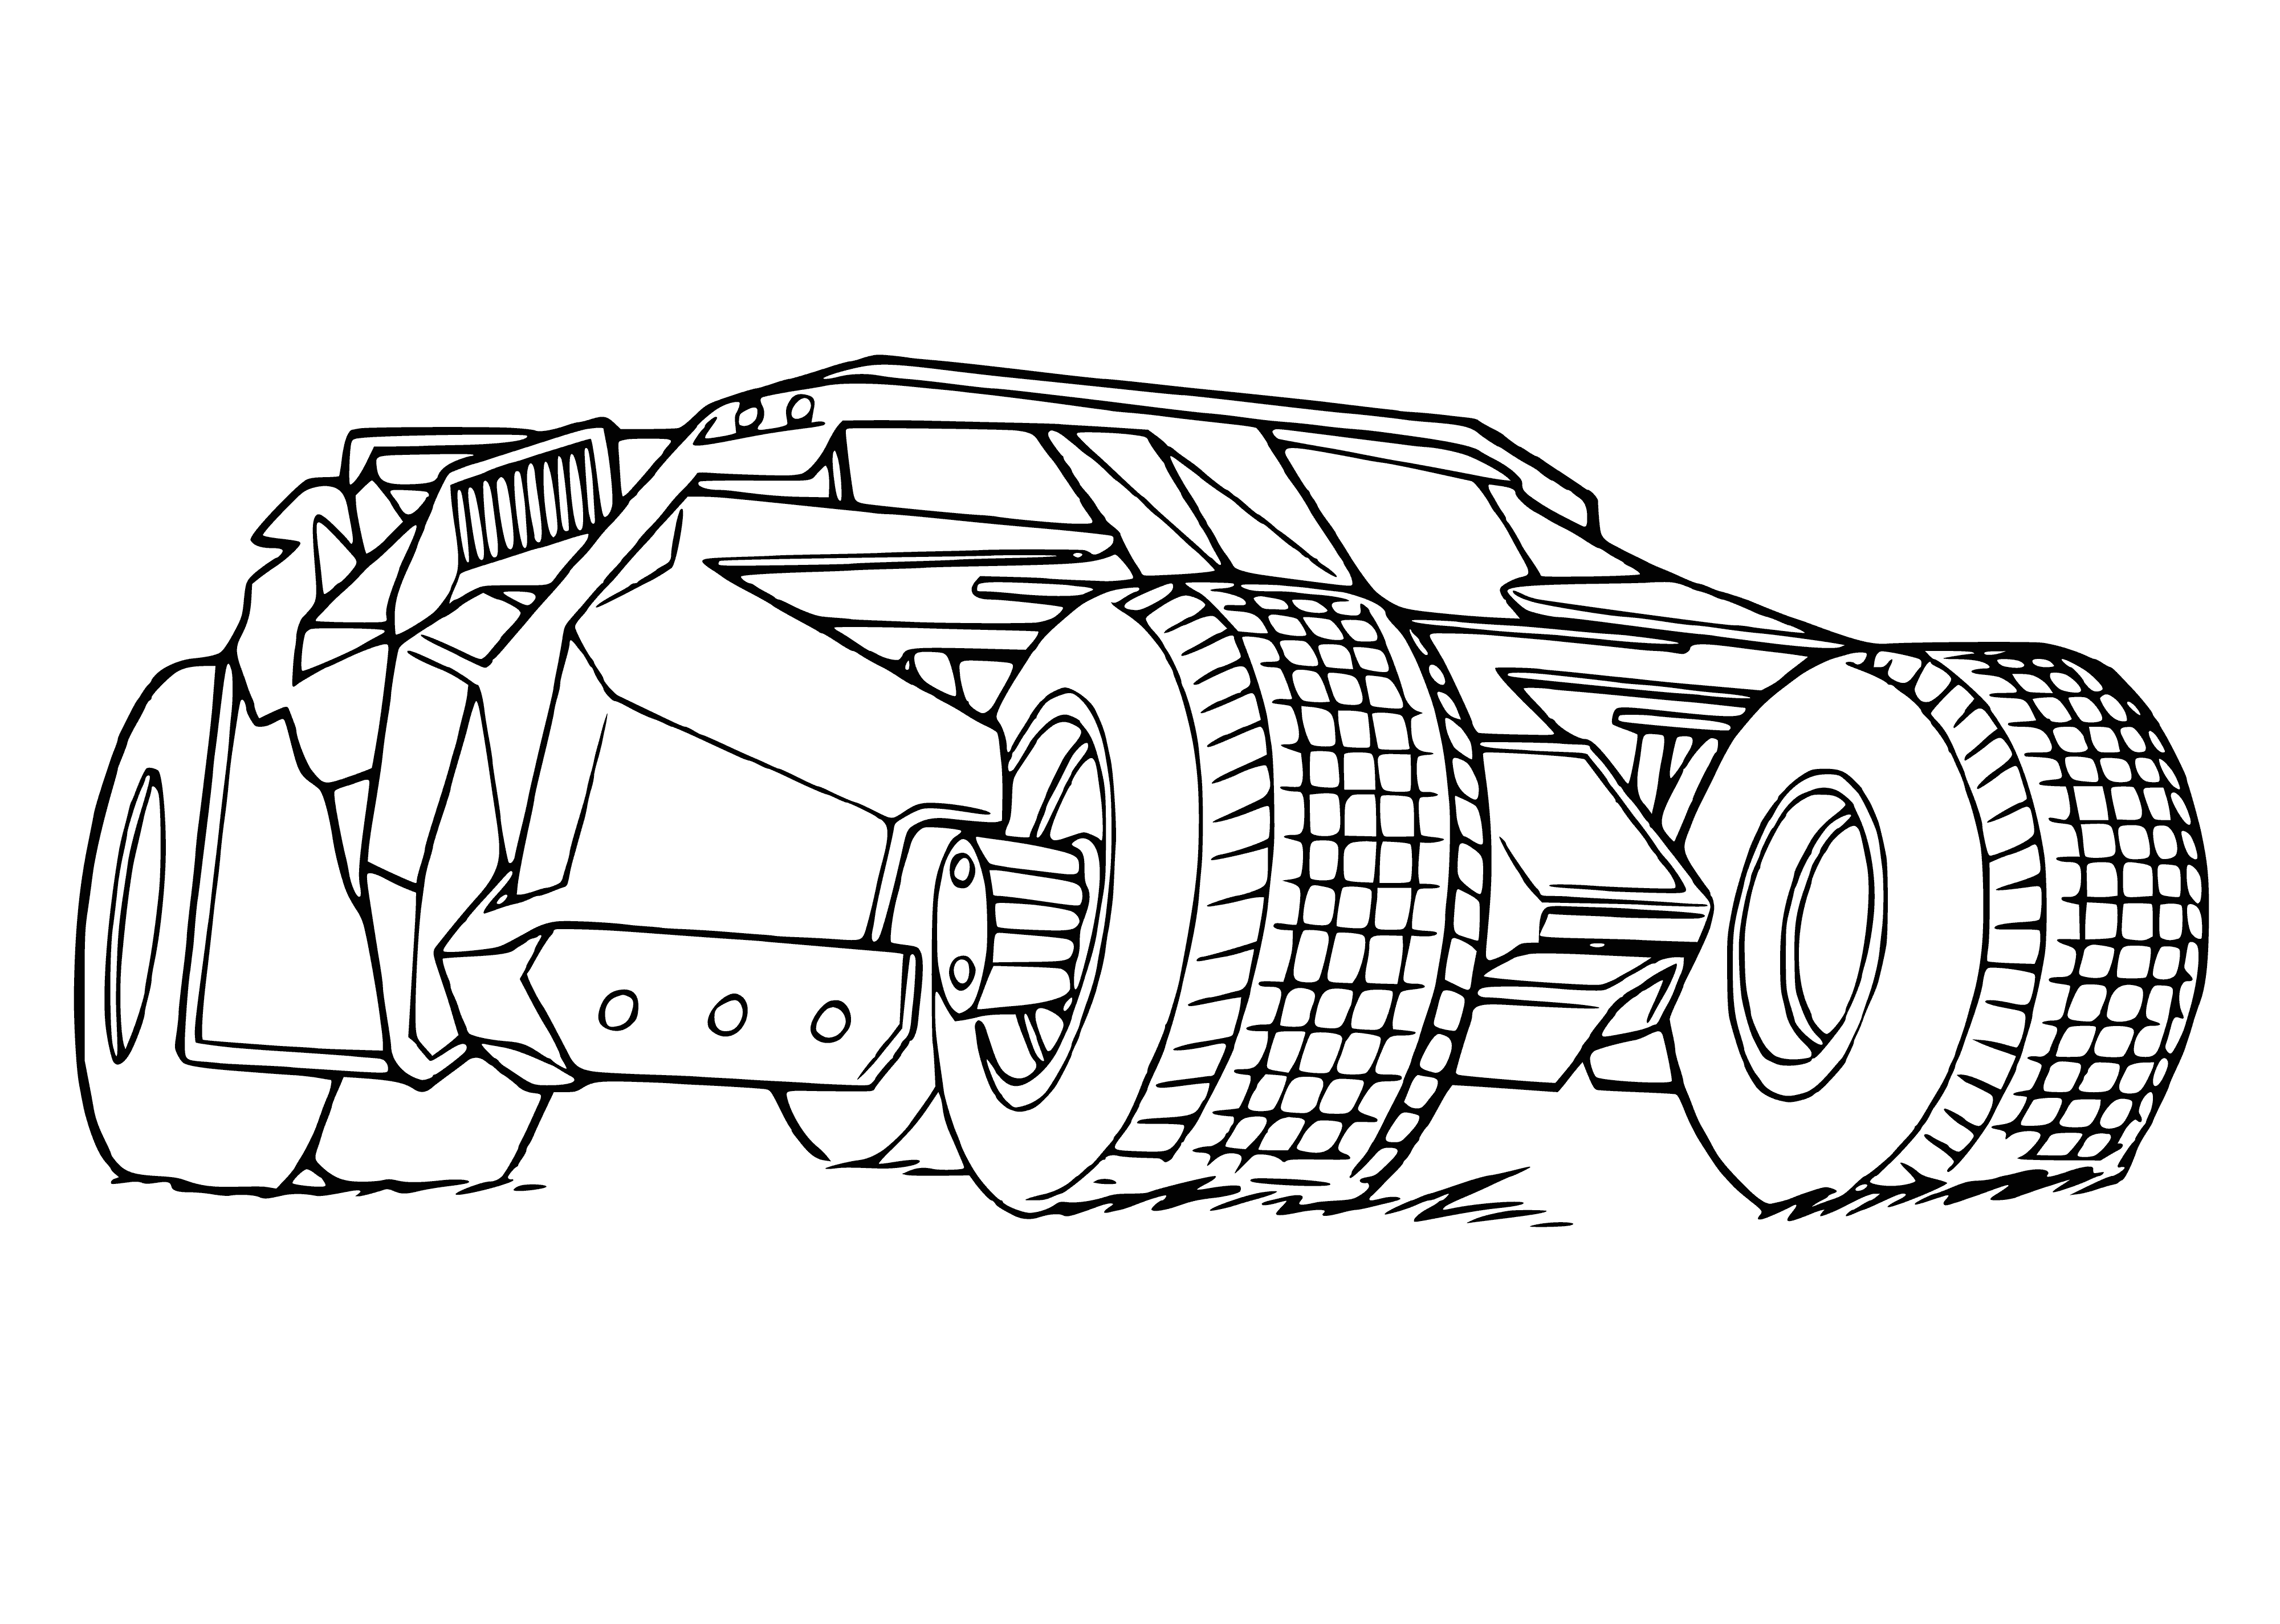 coloring page: Coloring page of Batman's mobile with his cape flowing, arms outstretched and a yellow symbol in the center.